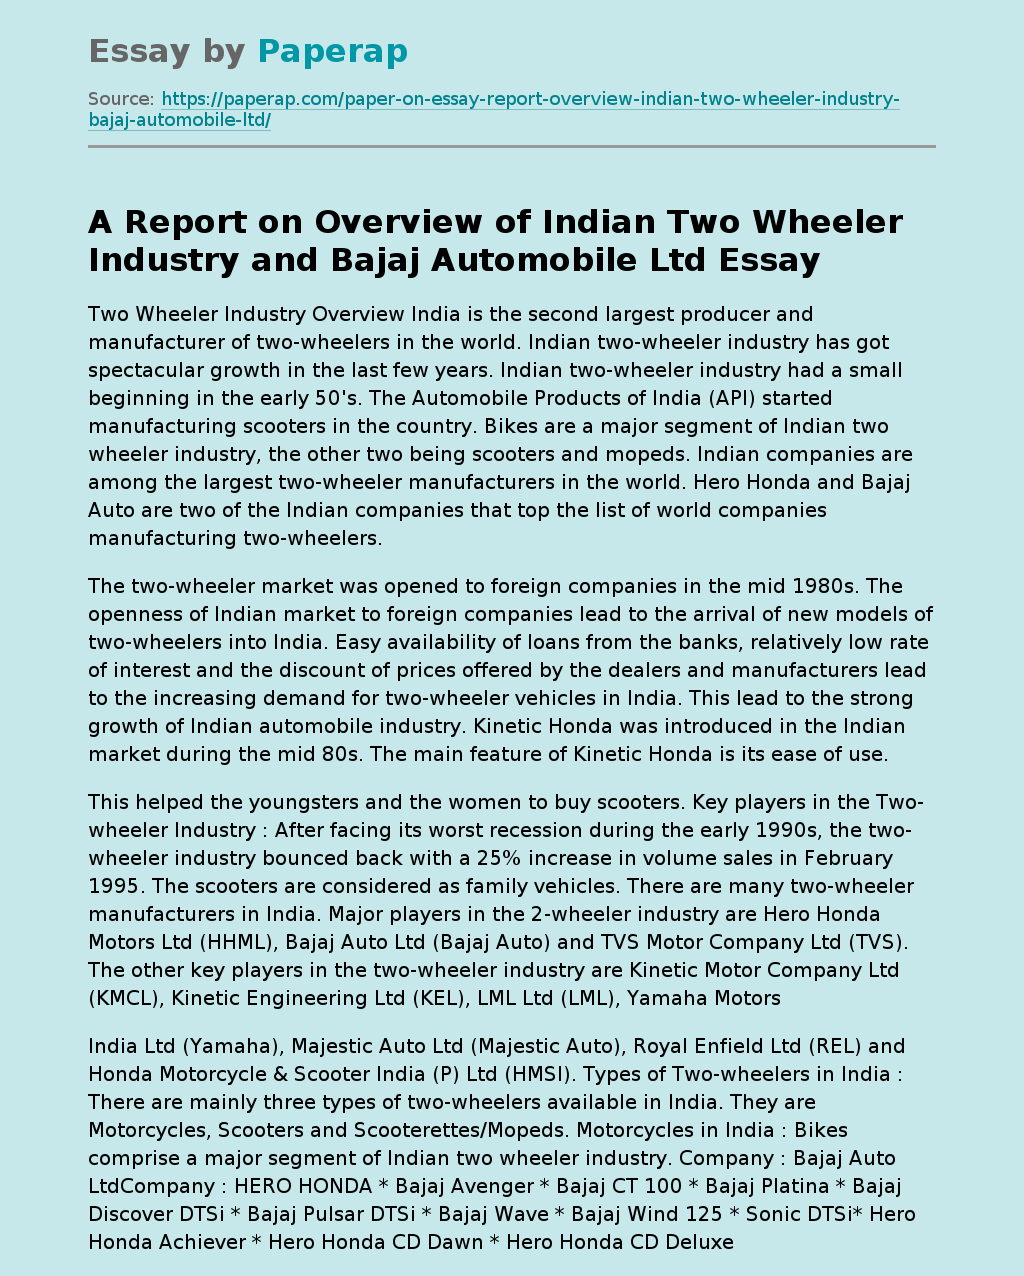 A Report on Overview of Indian Two Wheeler Industry and Bajaj Automobile Ltd